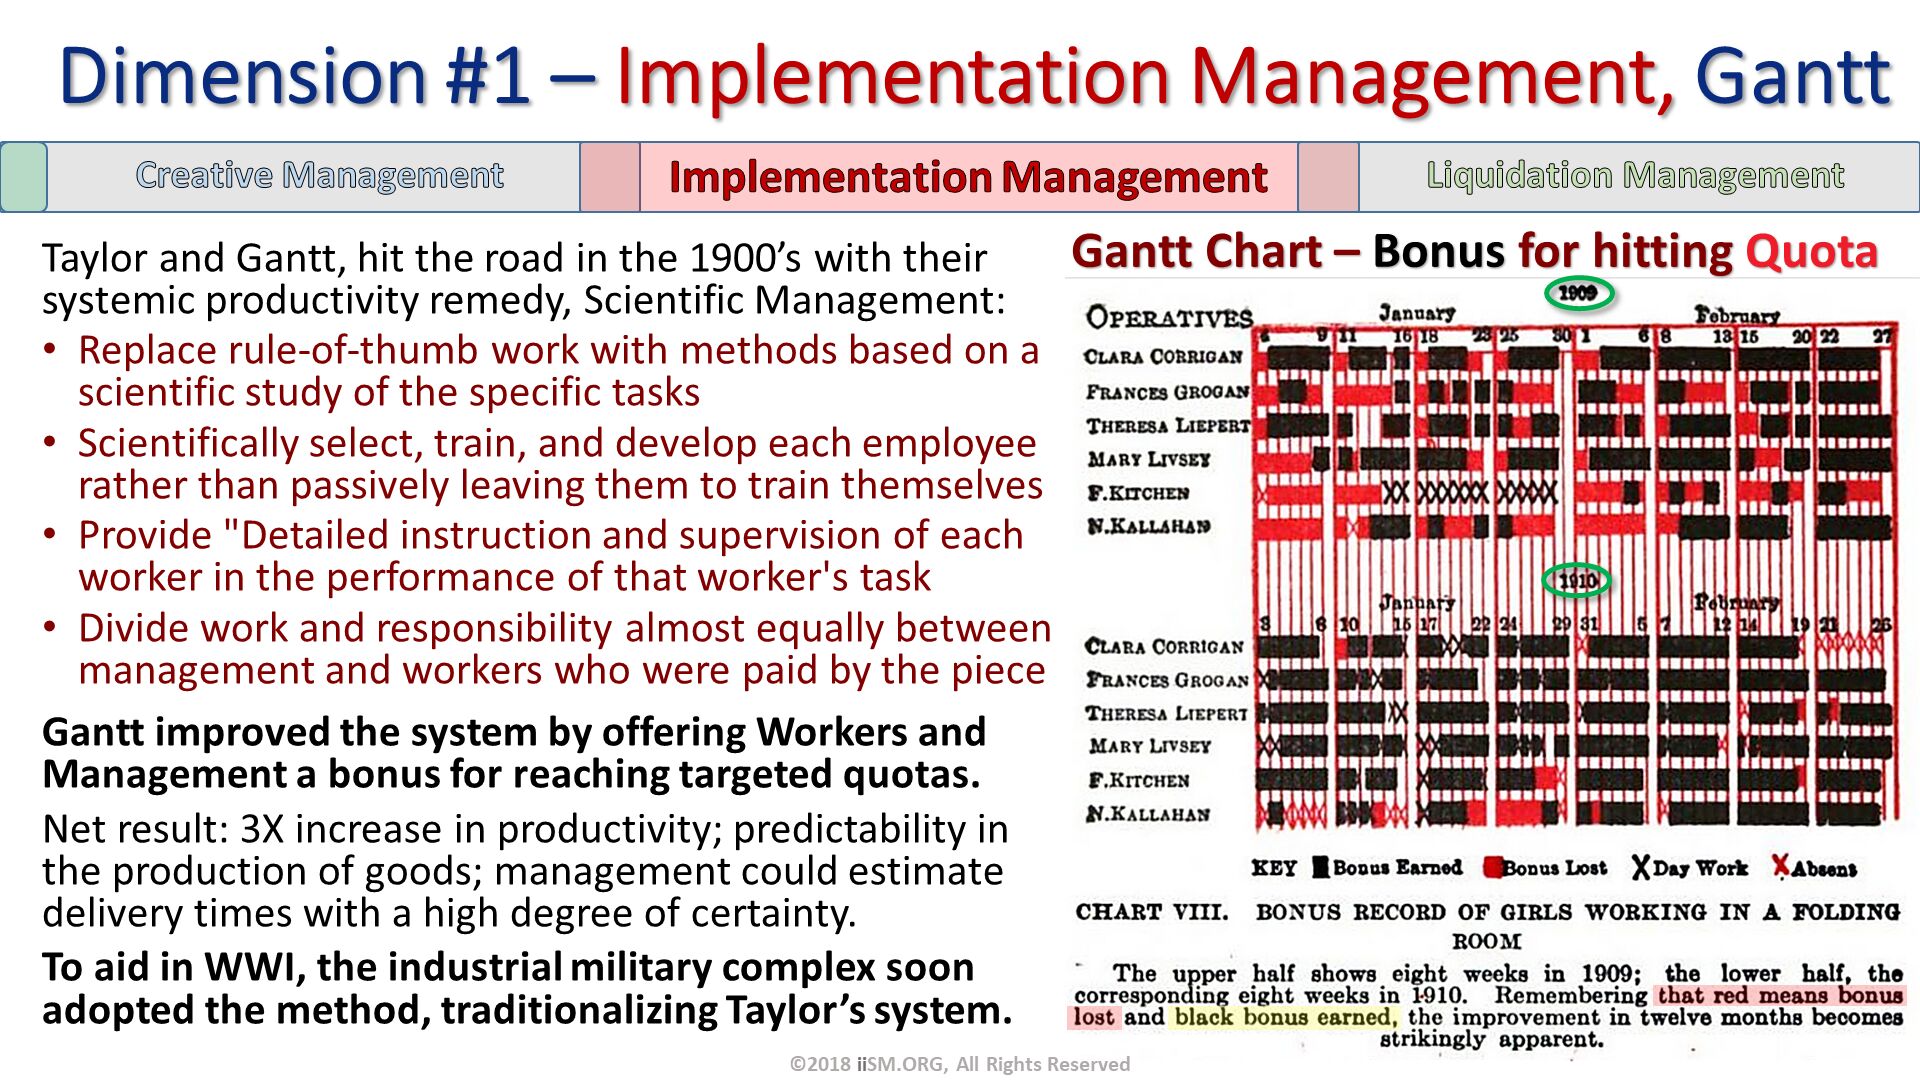 Taylor and Gantt, hit the road in the 1900’s with their systemic productivity remedy, Scientific Management:
Replace rule-of-thumb work with methods based on a scientific study of the specific tasks
Scientifically select, train, and develop each employee rather than passively leaving them to train themselves
Provide "Detailed instruction and supervision of each worker in the performance of that worker's task
Divide work and responsibility almost equally between management and workers who were paid by the piece
Gantt improved the system by offering Workers and Management a bonus for reaching targeted quotas.
Net result: 3X increase in productivity; predictability in the production of goods; management could estimate delivery times with a high degree of certainty.  
To aid in WWI, the industrial military complex soon adopted the method, traditionalizing Taylor’s system. Dimension #1 – Implementation Management, Gantt. Gantt Chart – Bonus for hitting Quota. ©2018 iiSM.ORG, All Rights Reserved. 